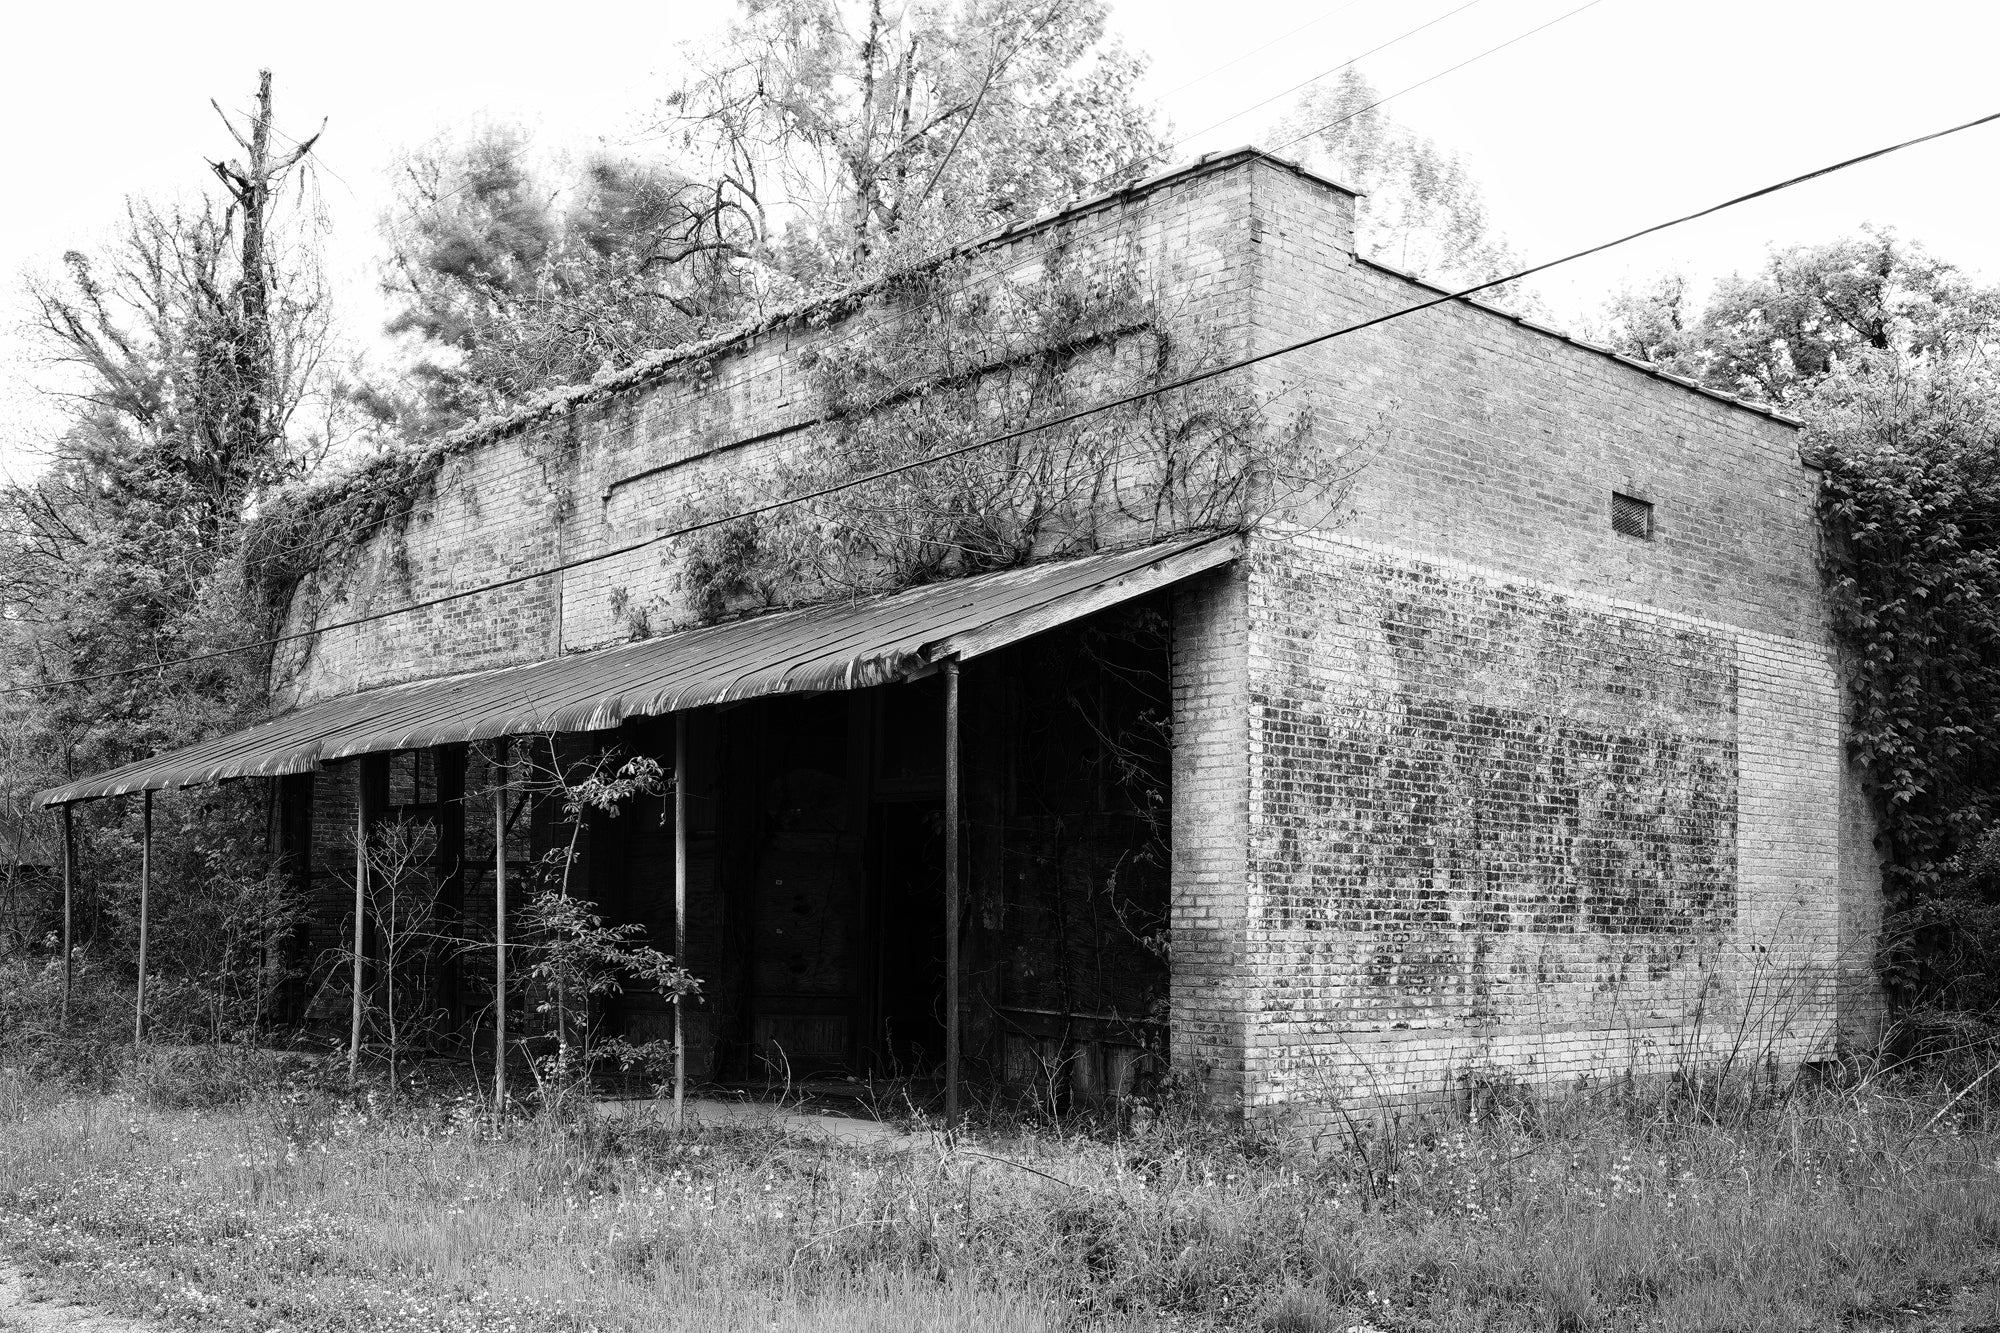 Ruins of Tibbs' Store in Hushpuckena, Mississippi - Black and White Photograph by Keith Dotson. Buy a fine art print.